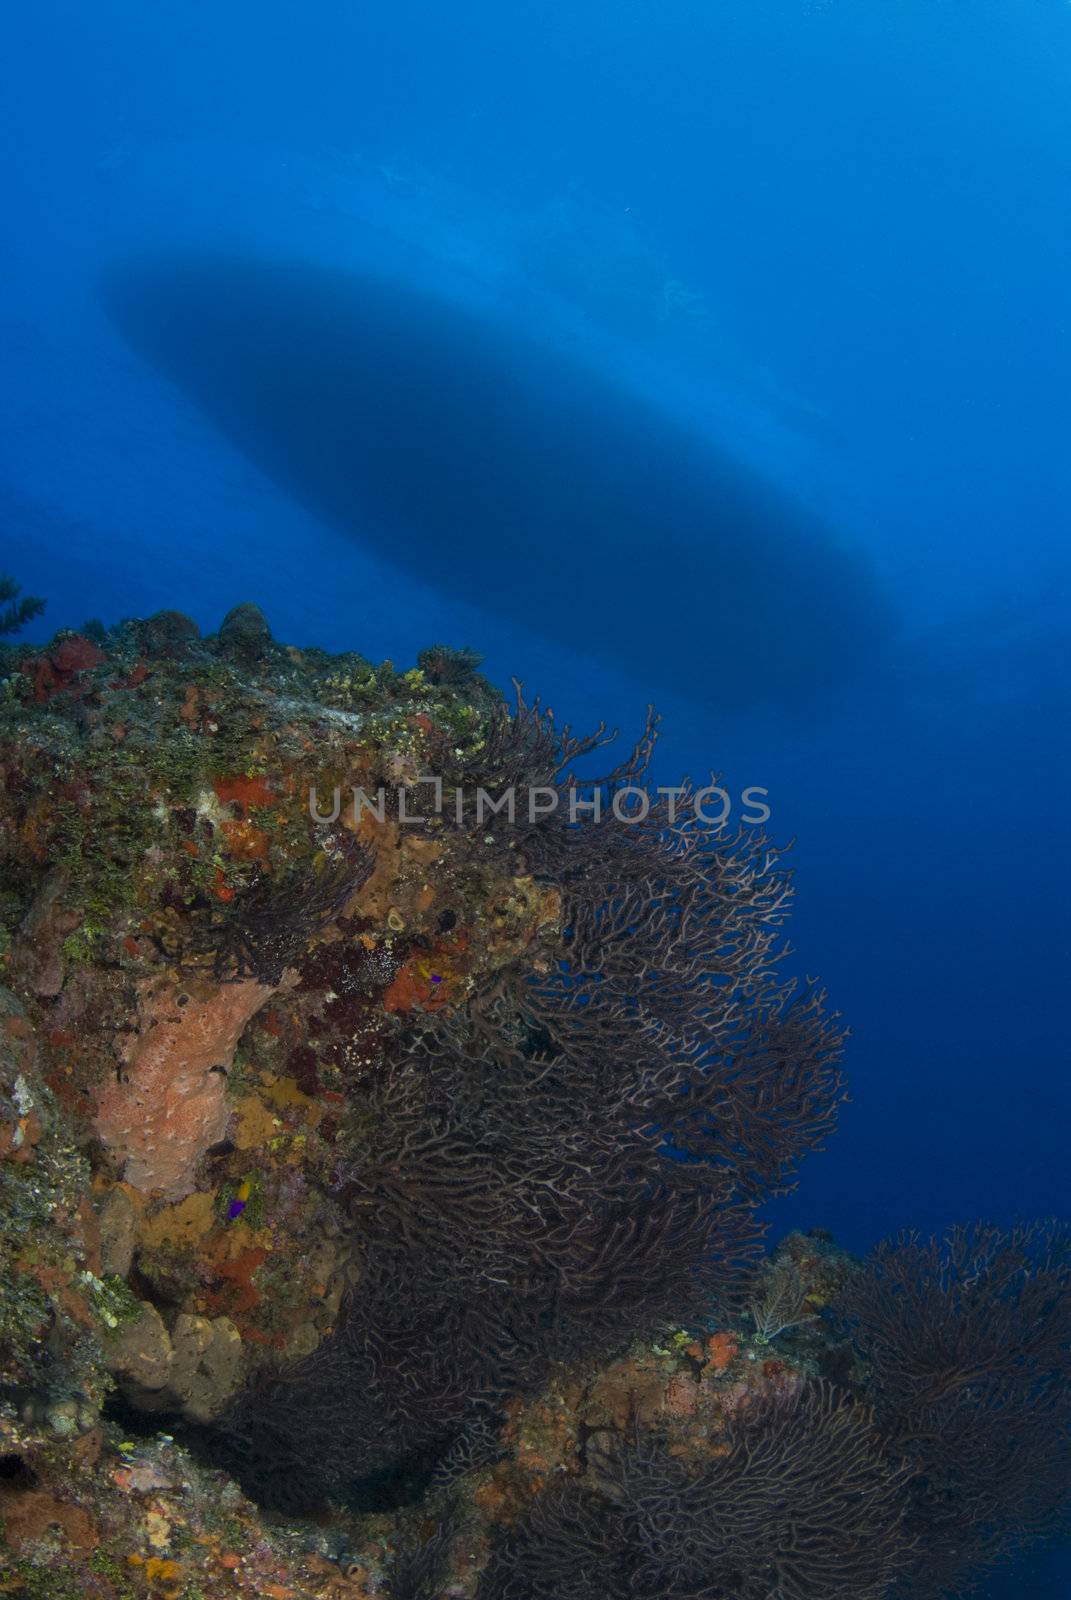 A coral head in the foreground in beautiful blue ocean water, with the hull of the boat visible above the surface of the water.